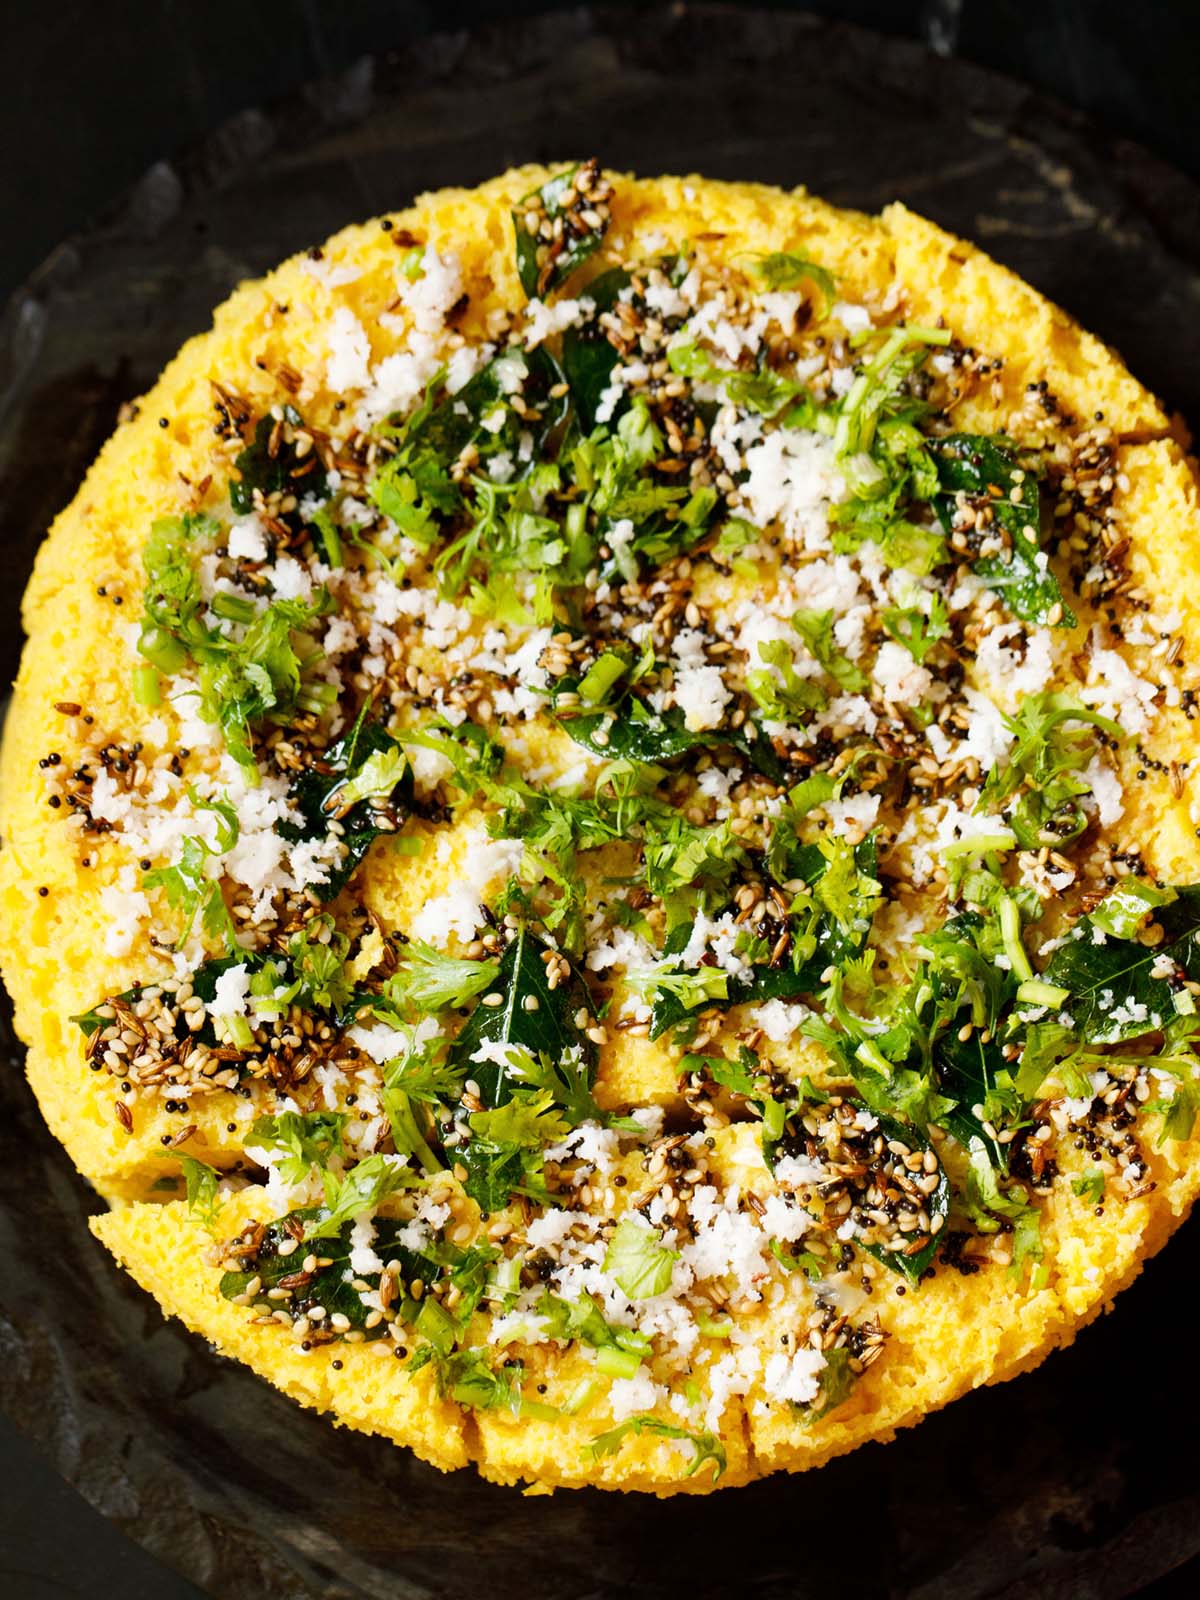 top view of the round steamed khman dhokla topped and garnished with the tempered spices, coriander leaves, and fresh grated coconut